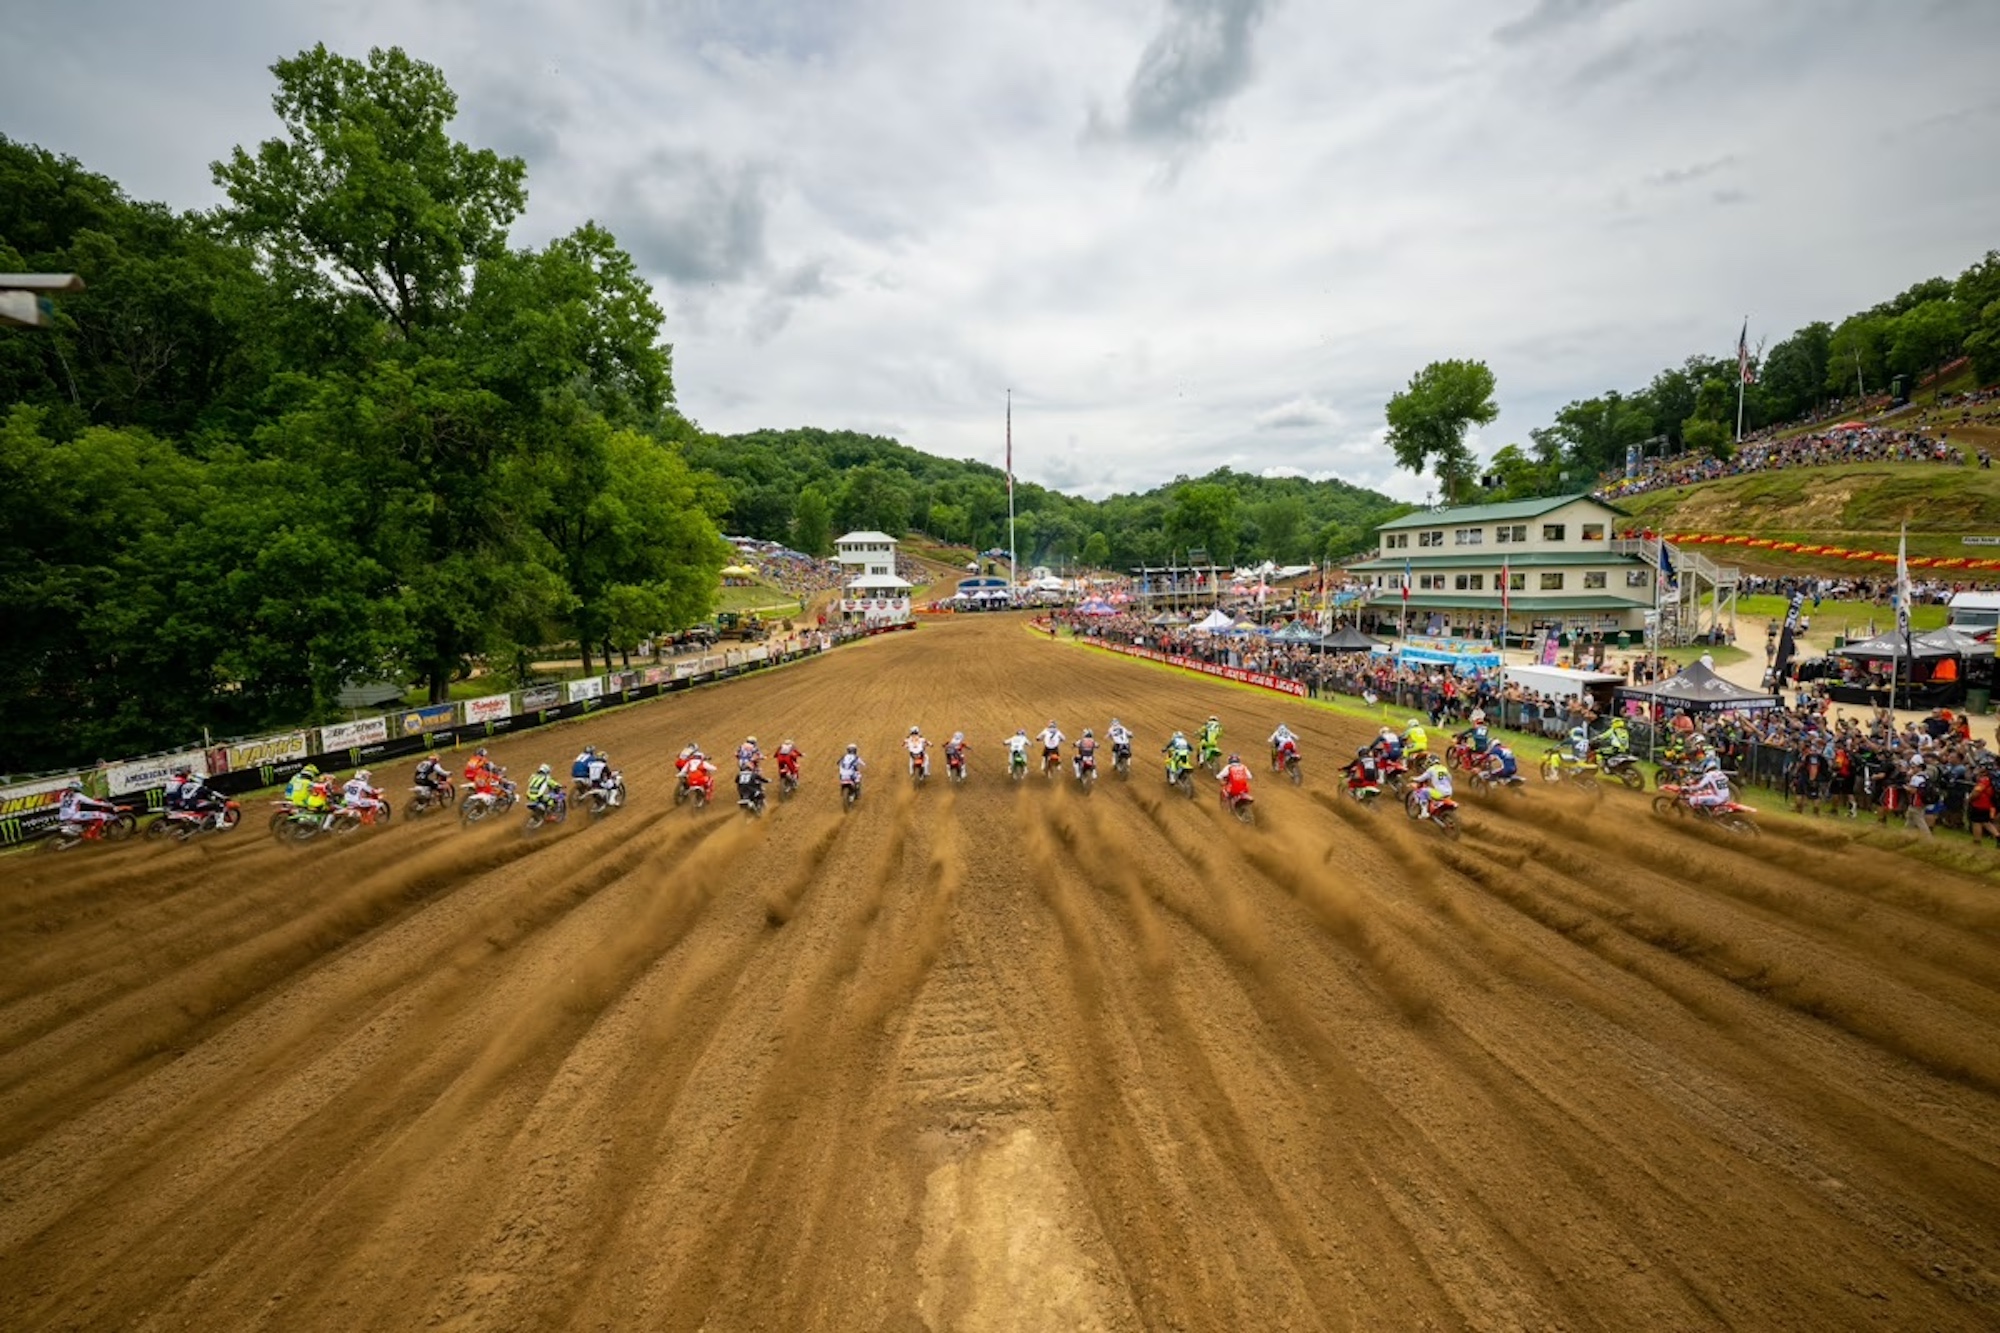 A view of the 2023 AMA Pro MX Championship efforts. Media provided by Pro Motocross.